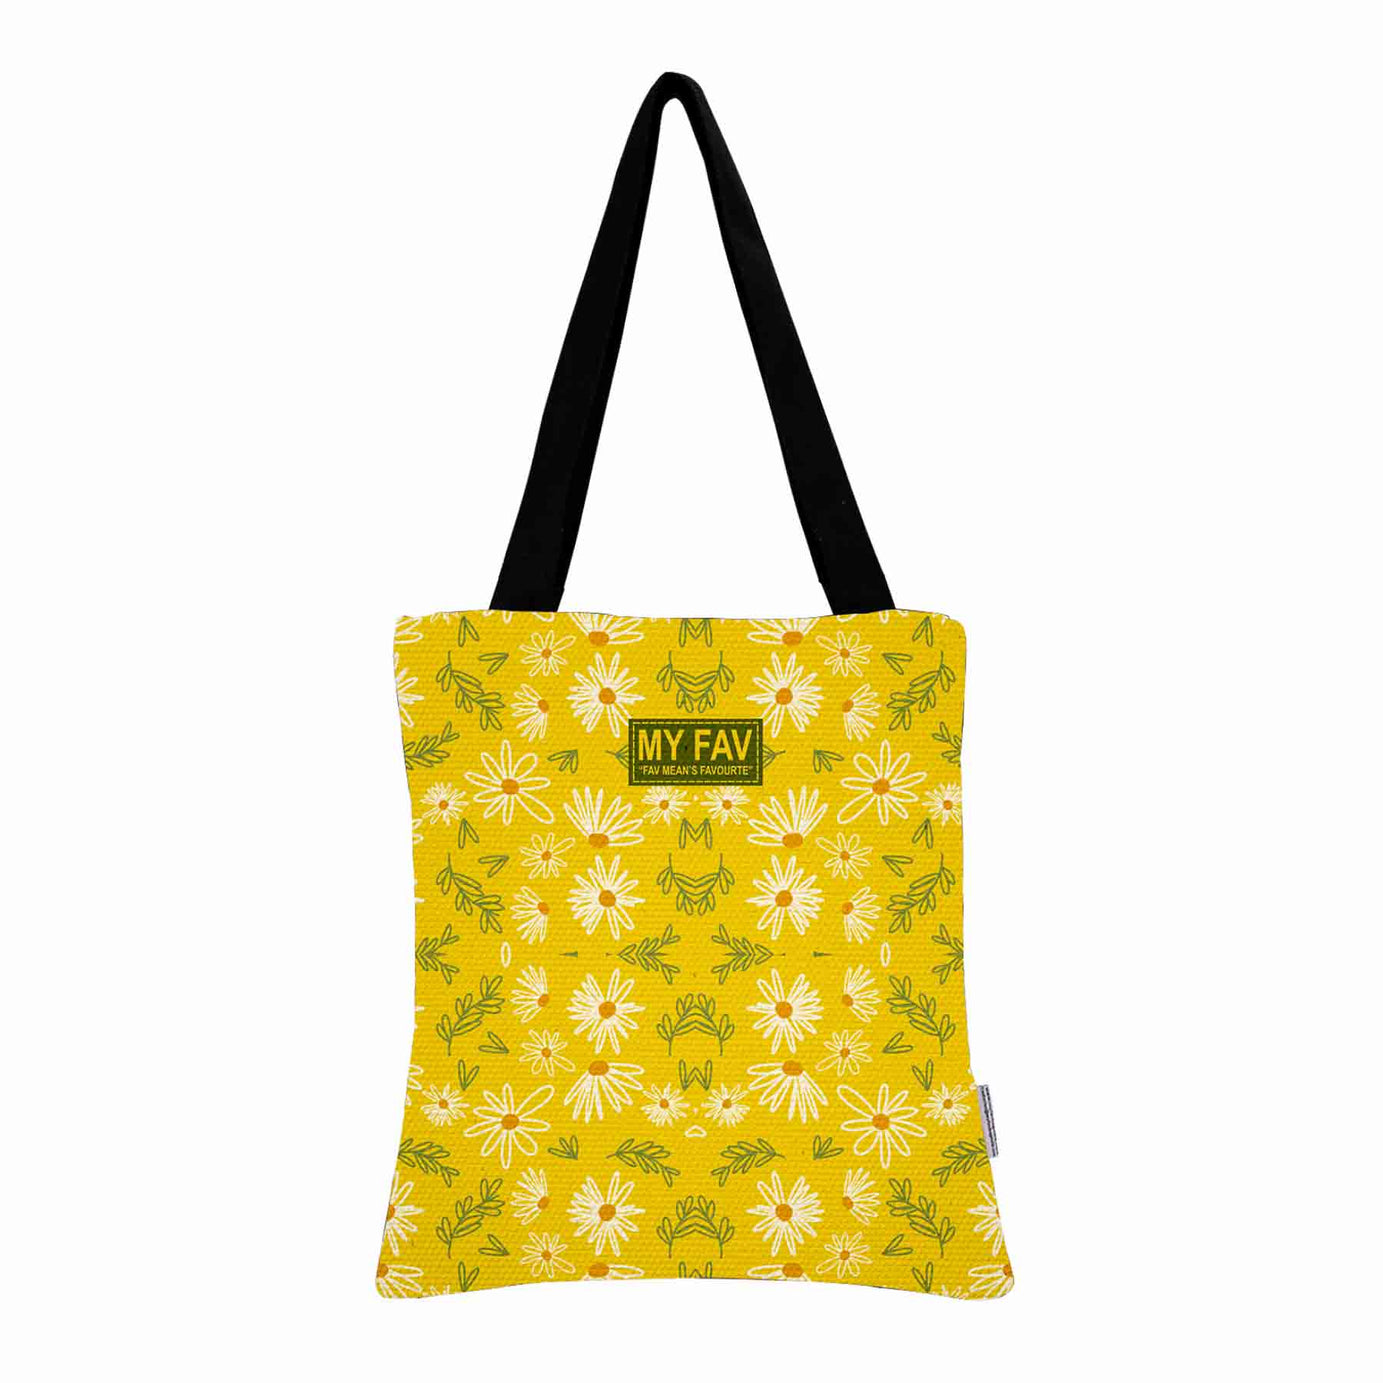 My Fav Floral Printed Cotton Canvas Tote Bag